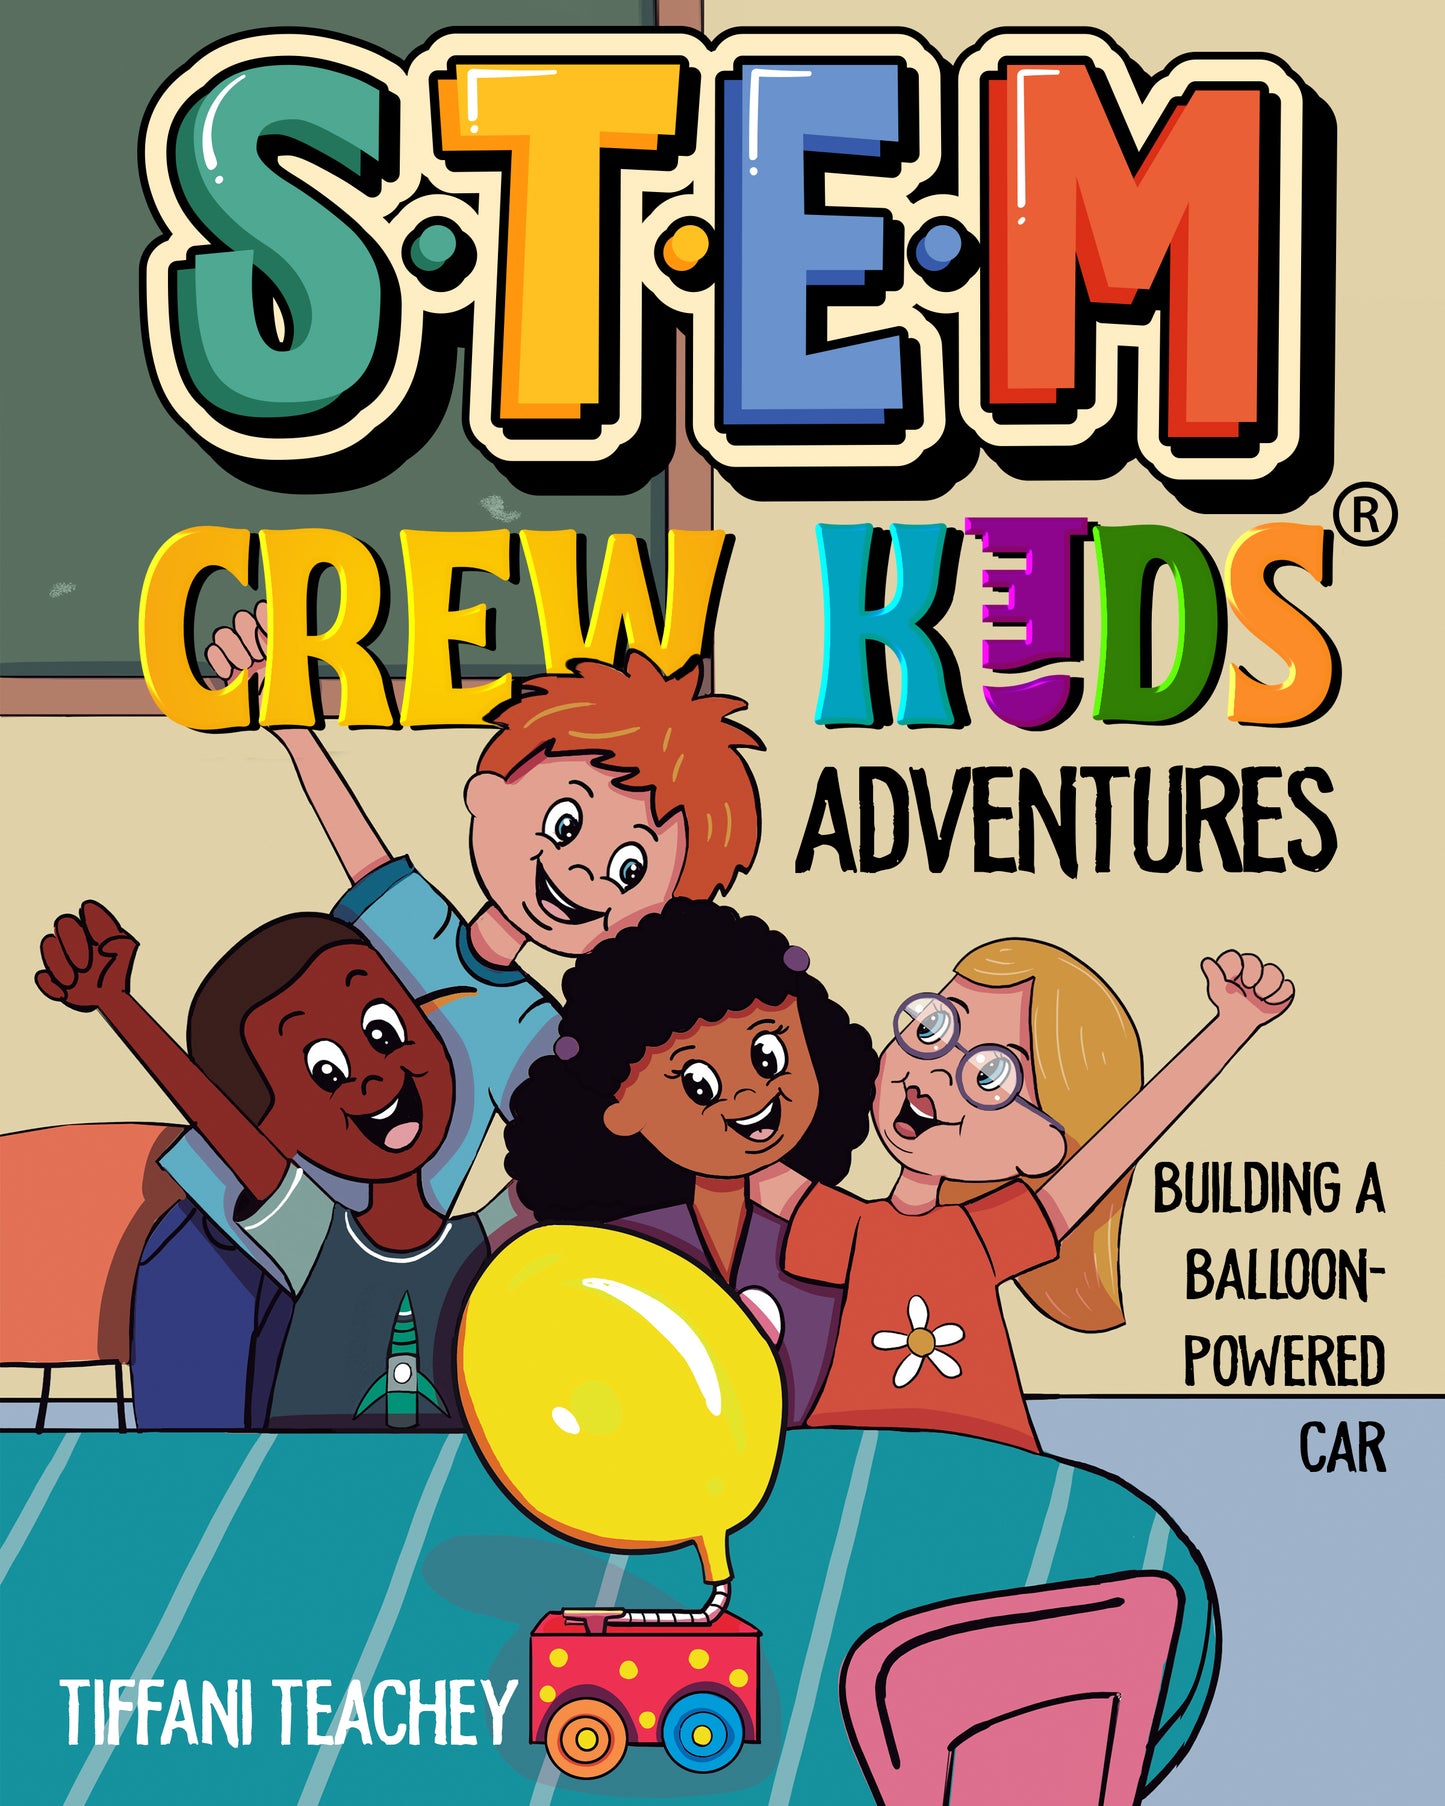 The STEM Crew Kids Adventures: Building the Balloon-Powered Car